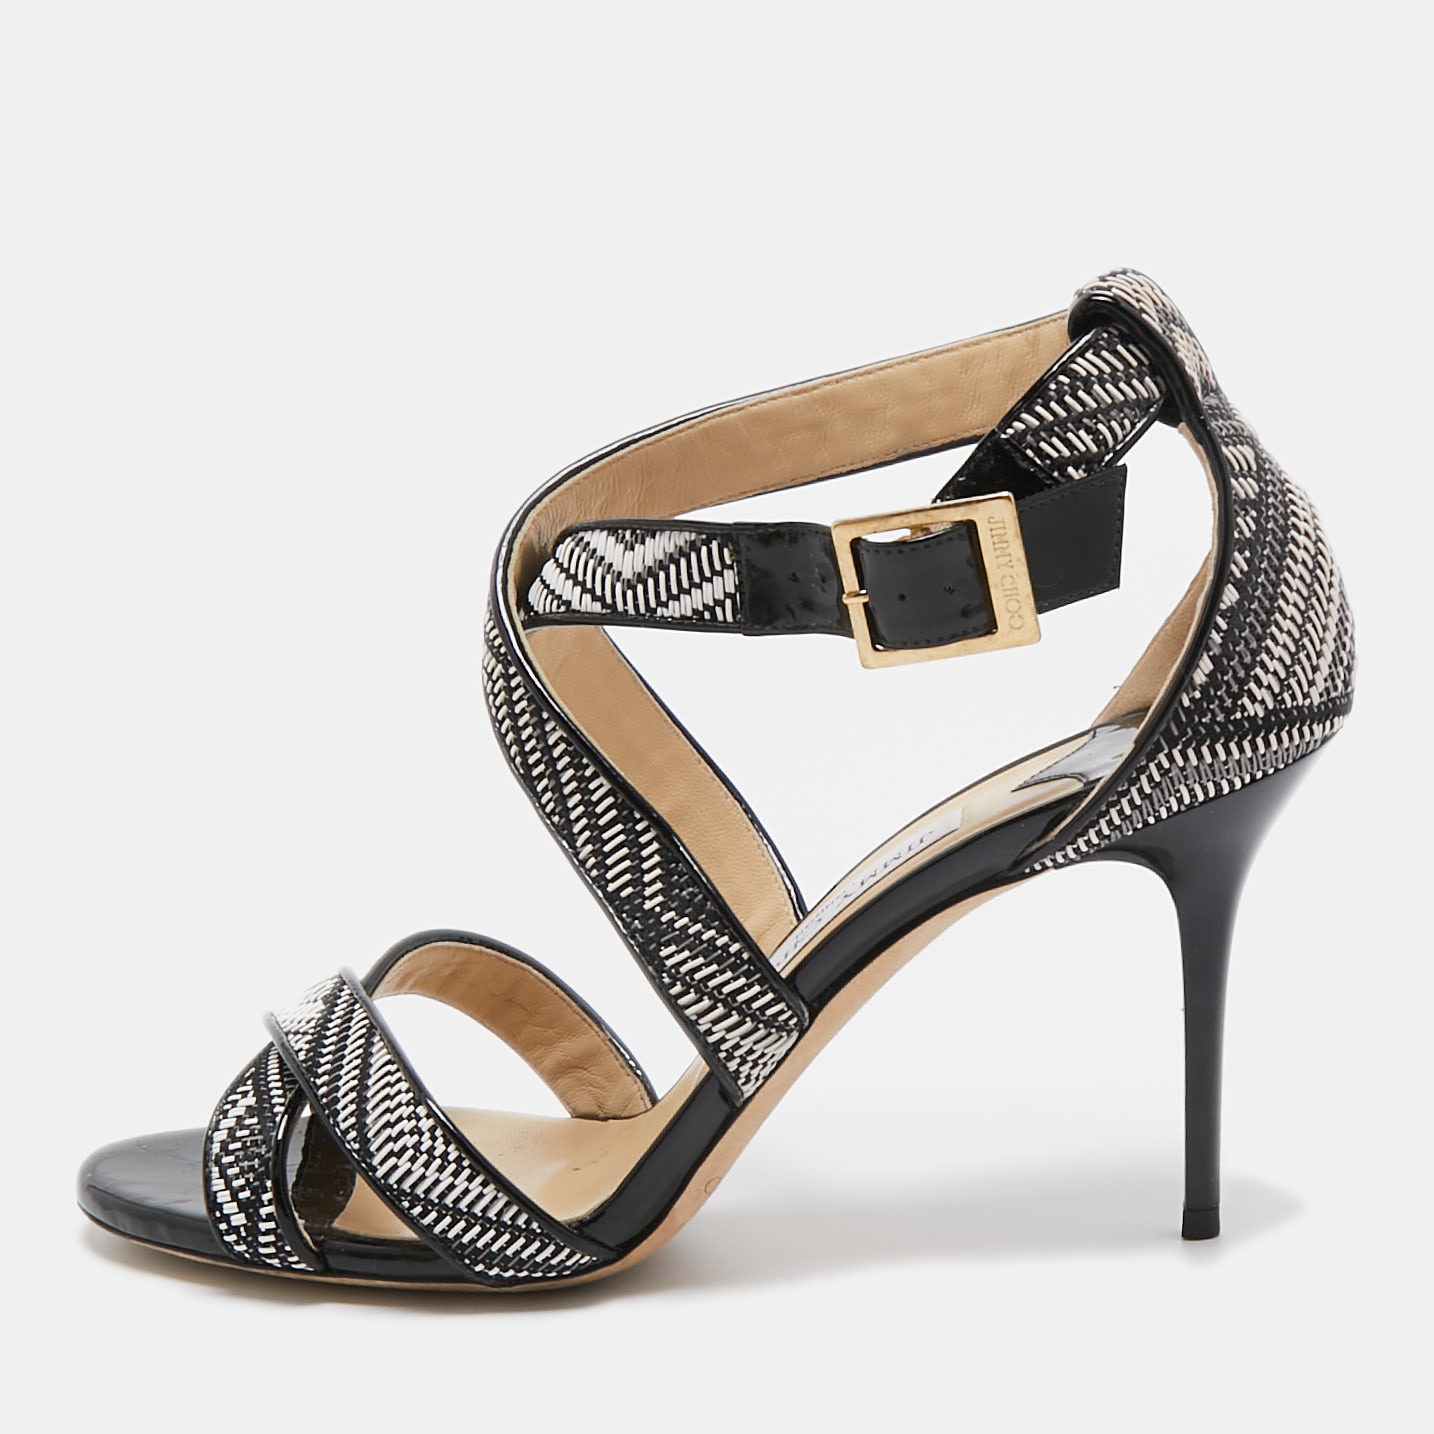 Pre-owned Jimmy Choo Black/cream Patent Striped Sandals Size 40